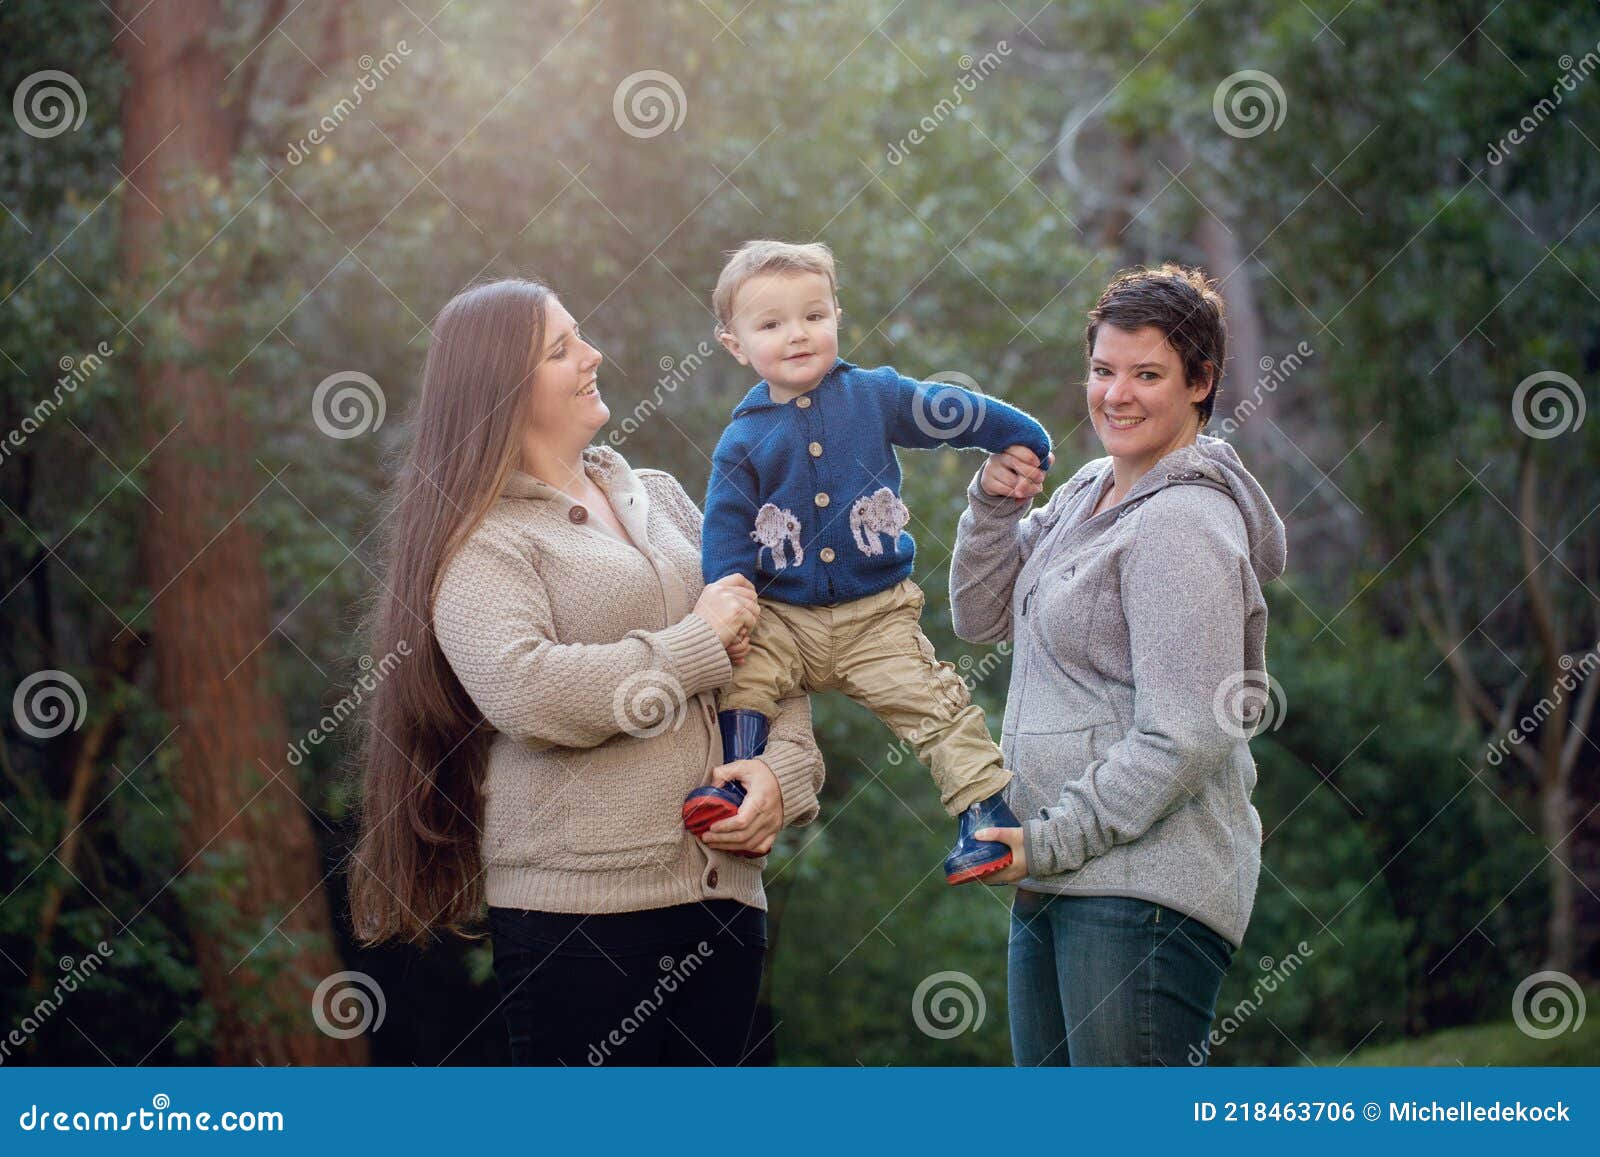 A Lesbian Couple Holding a Child pic